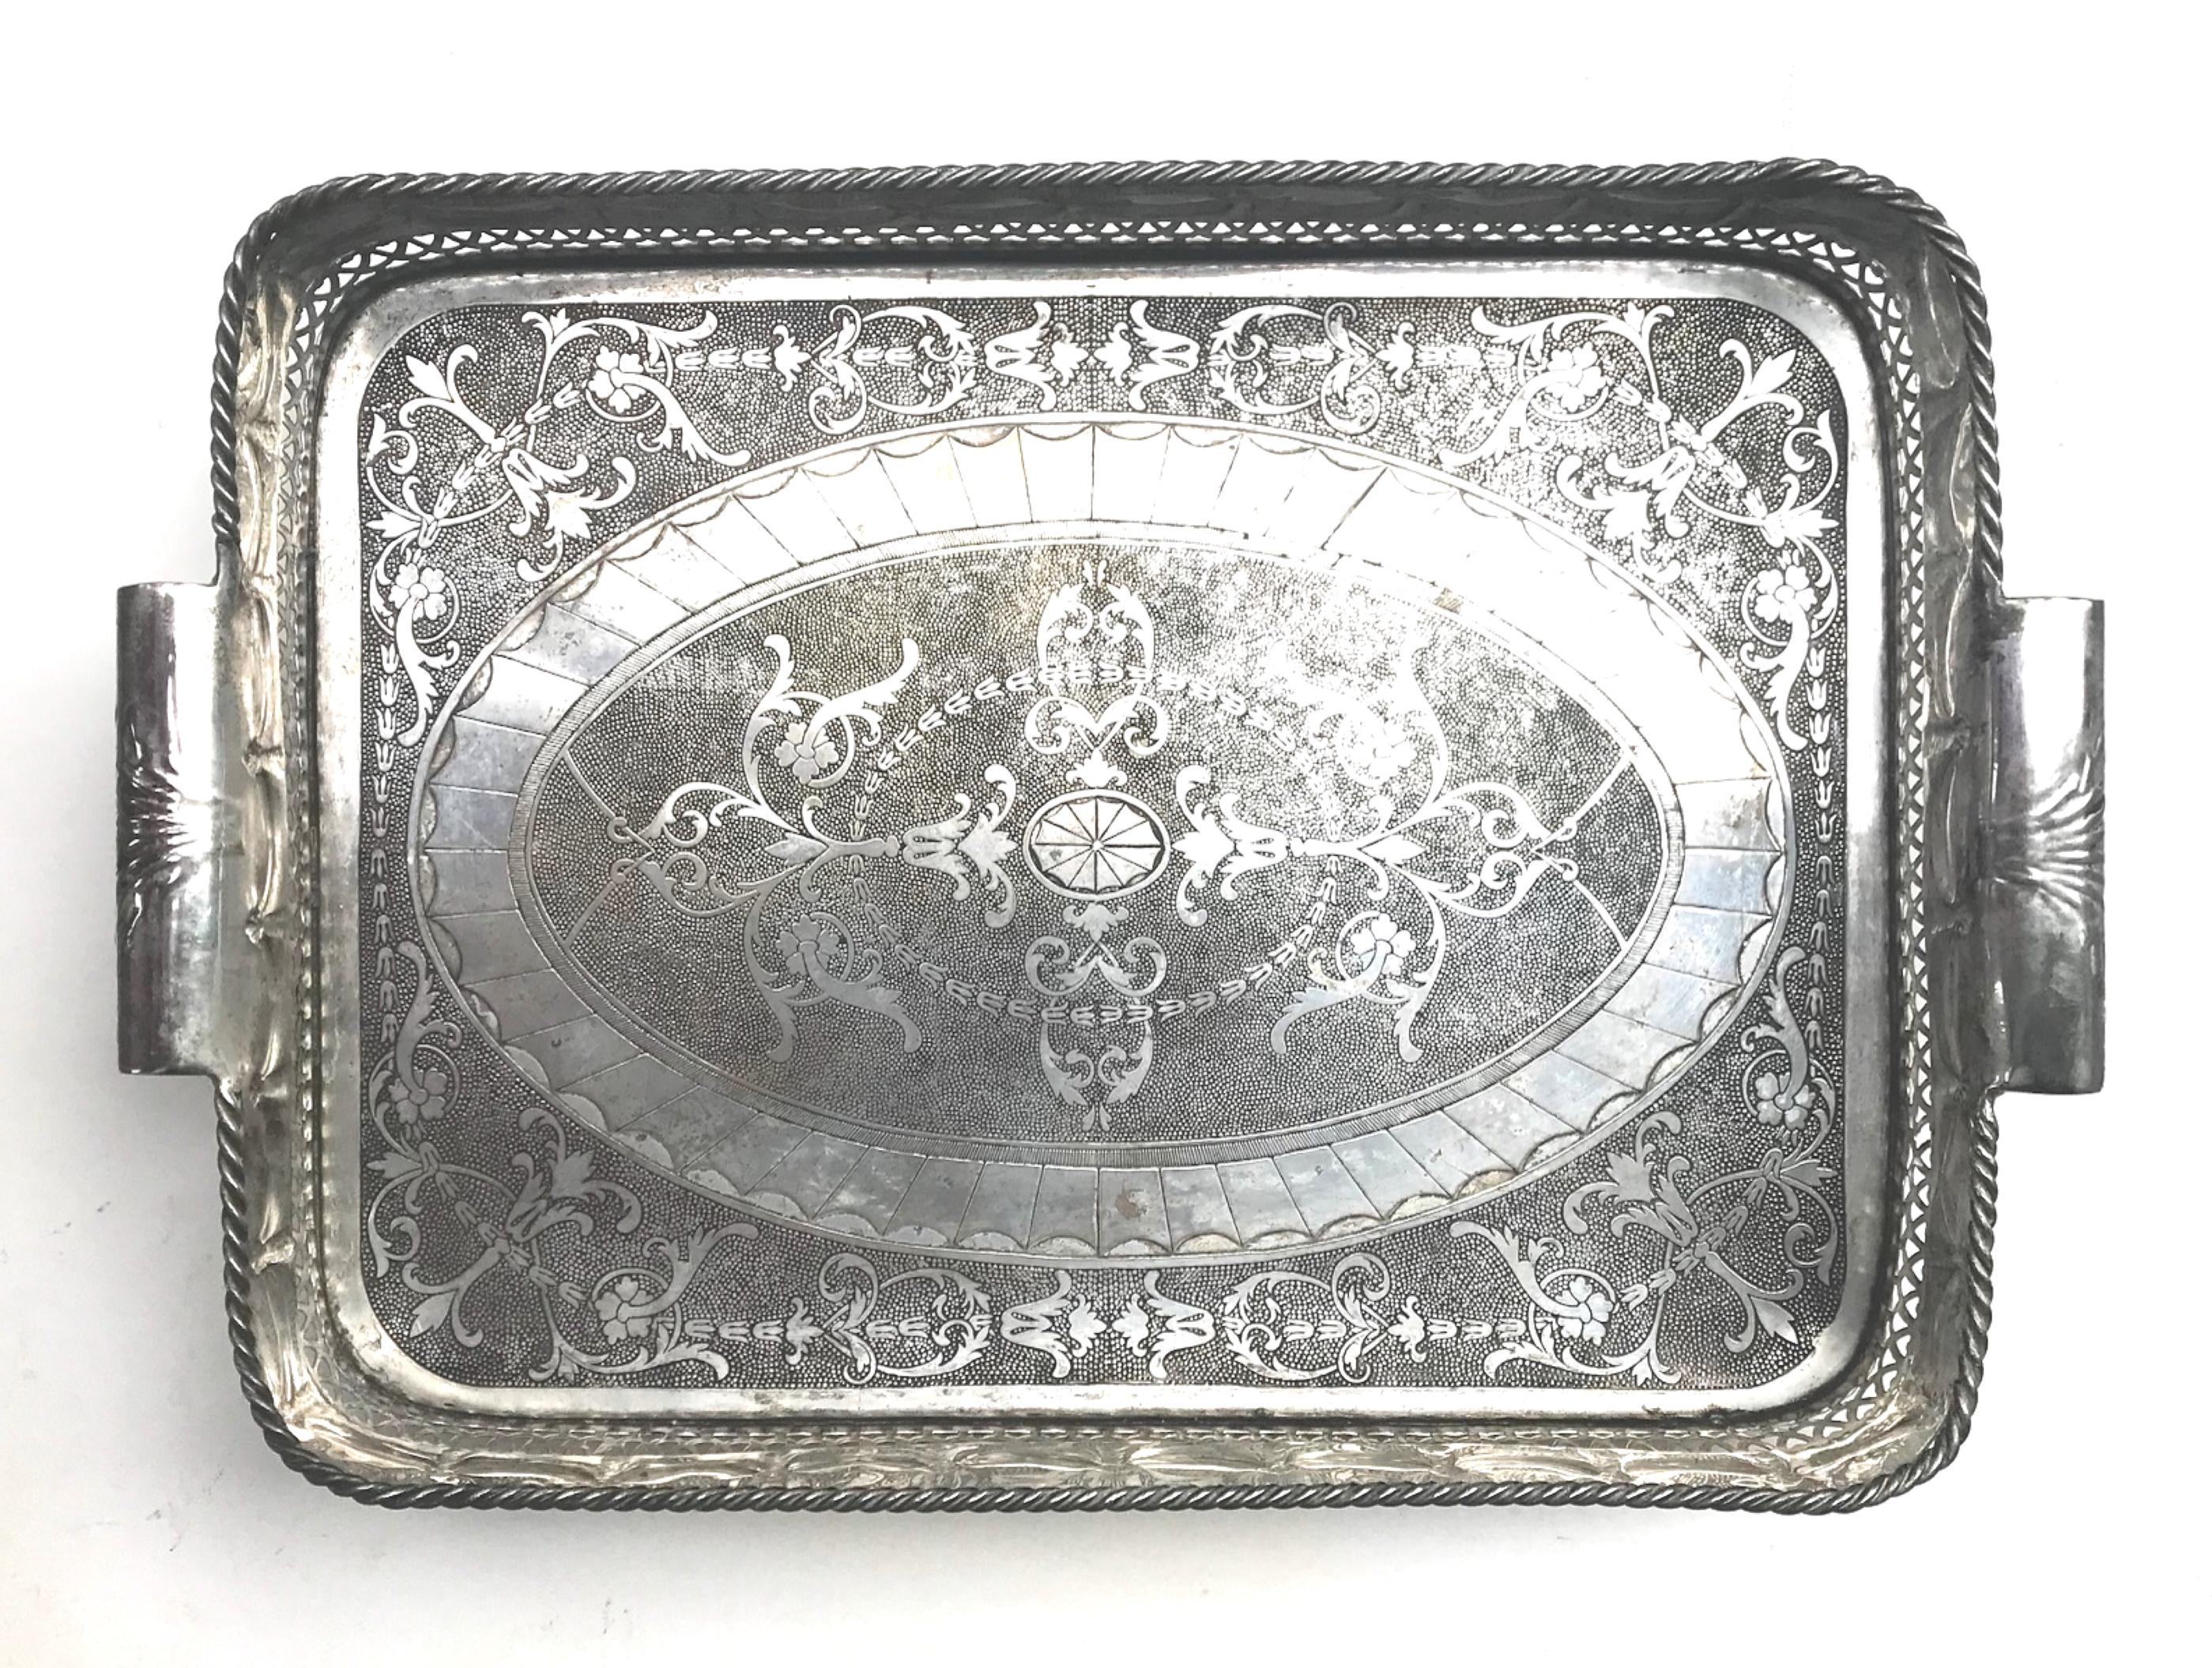 Vintage large silver plated Anglo-Indian Butlers gallery tray

Magnificent large silver plated butlers tray. The base is engraved in a beautiful pattern. It features a highly stylized pierced gallery with scrolled handles at either side. This